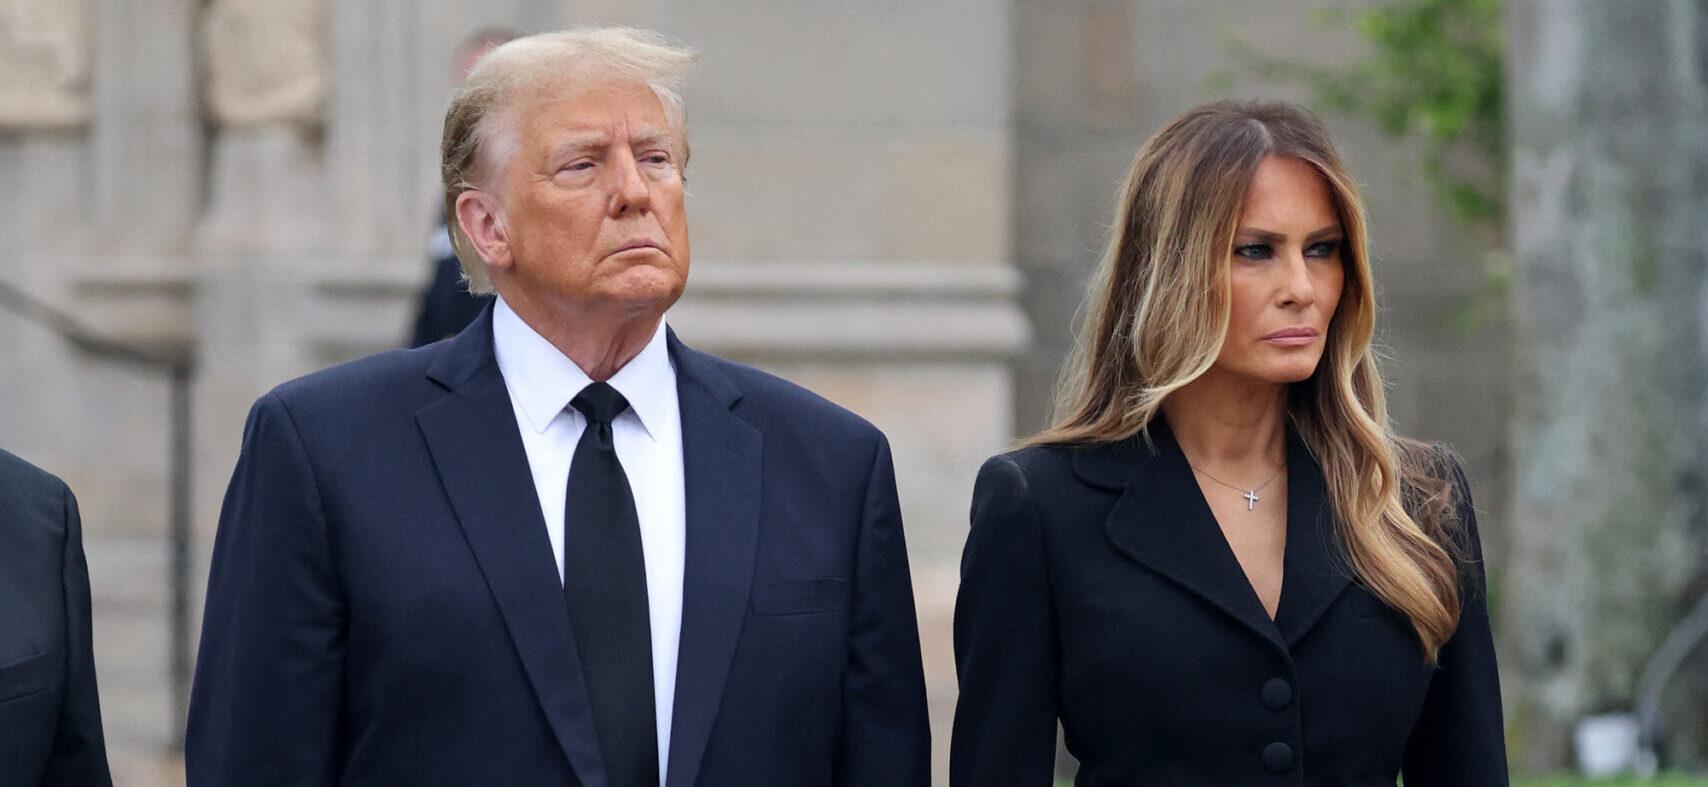 Donald Trump Mocked For ‘Awkward’ Birthday Wish To Wife Melania Outside Courtroom